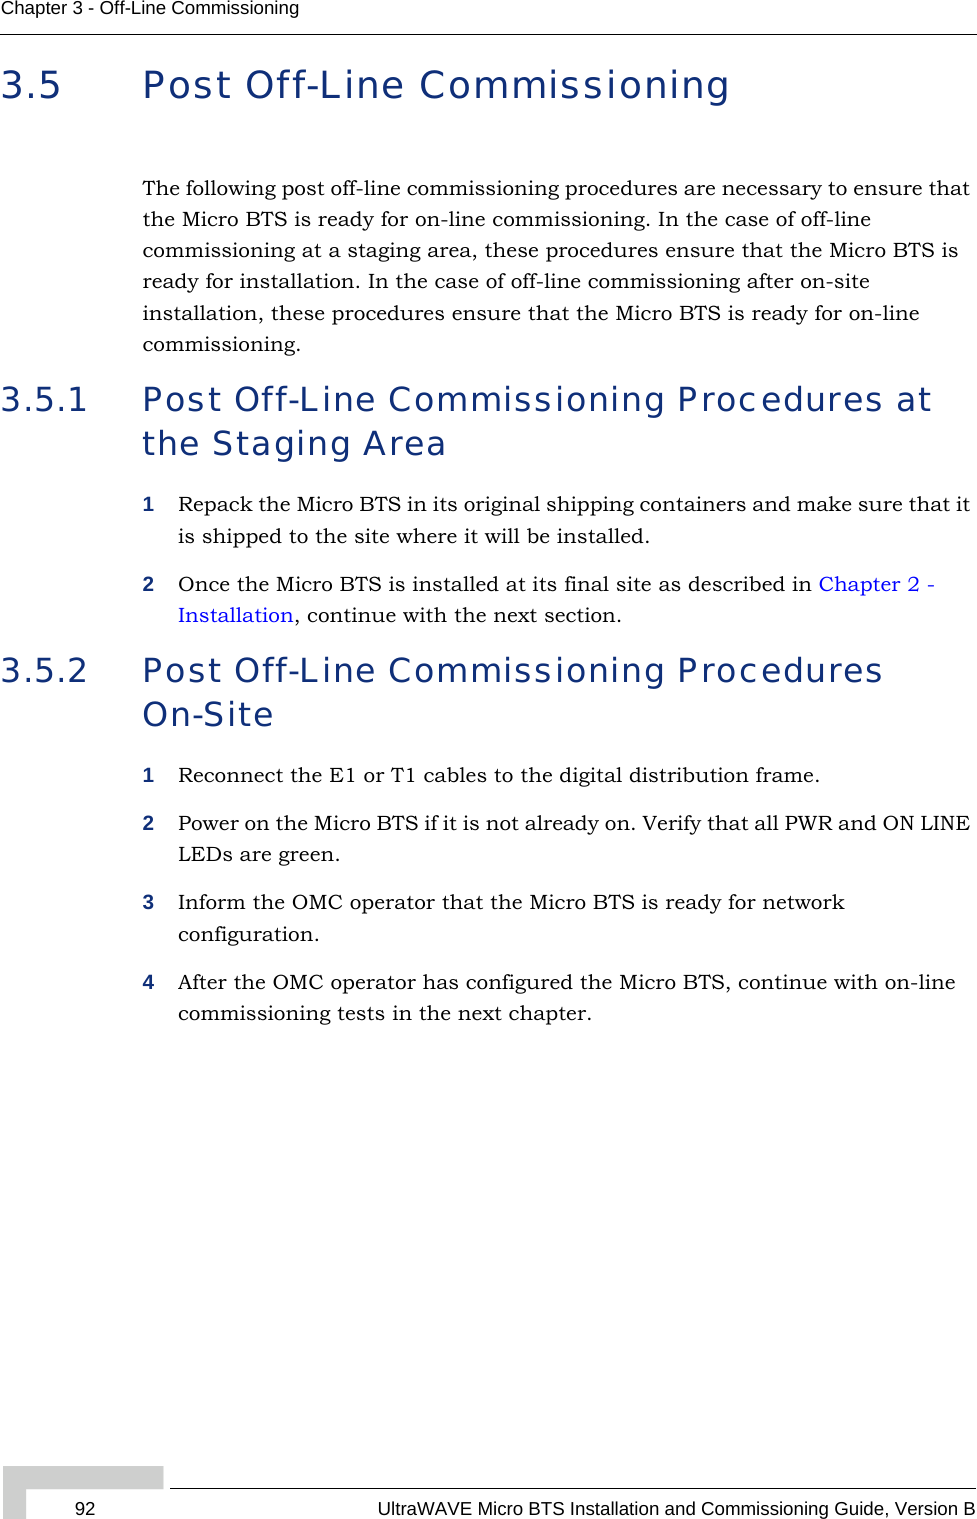 92 UltraWAVE Micro BTS Installation and Commissioning Guide, Version BChapter 3 - Off-Line Commissioning3.5 Post Off-Line CommissioningThe following post off-line commissioning procedures are necessary to ensure that the Micro BTS is ready for on-line commissioning. In the case of off-line commissioning at a staging area, these procedures ensure that the Micro BTS is ready for installation. In the case of off-line commissioning after on-site installation, these procedures ensure that the Micro BTS is ready for on-line commissioning.3.5.1 Post Off-Line Commissioning Procedures at the Staging Area1Repack the Micro BTS in its original shipping containers and make sure that it is shipped to the site where it will be installed.2Once the Micro BTS is installed at its final site as described in Chapter 2 - Installation, continue with the next section.3.5.2 Post Off-Line Commissioning Procedures On-Site1Reconnect the E1 or T1 cables to the digital distribution frame. 2Power on the Micro BTS if it is not already on. Verify that all PWR and ON LINE LEDs are green.3Inform the OMC operator that the Micro BTS is ready for network configuration.4After the OMC operator has configured the Micro BTS, continue with on-line commissioning tests in the next chapter.